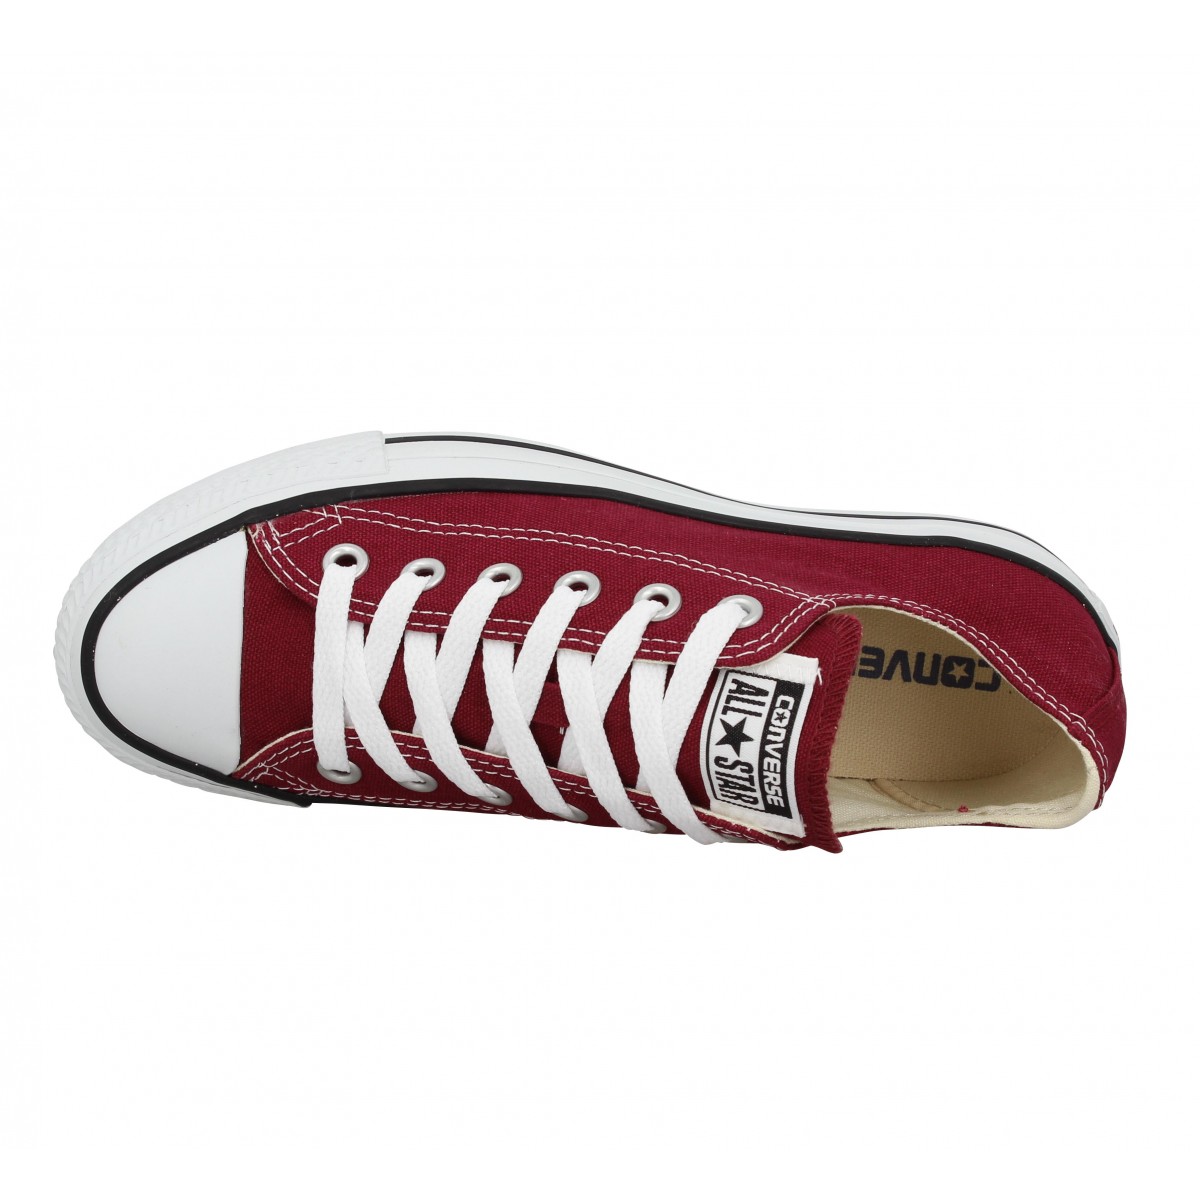 Chaussures Converse chuck taylor all star toile femme bordeaux ...